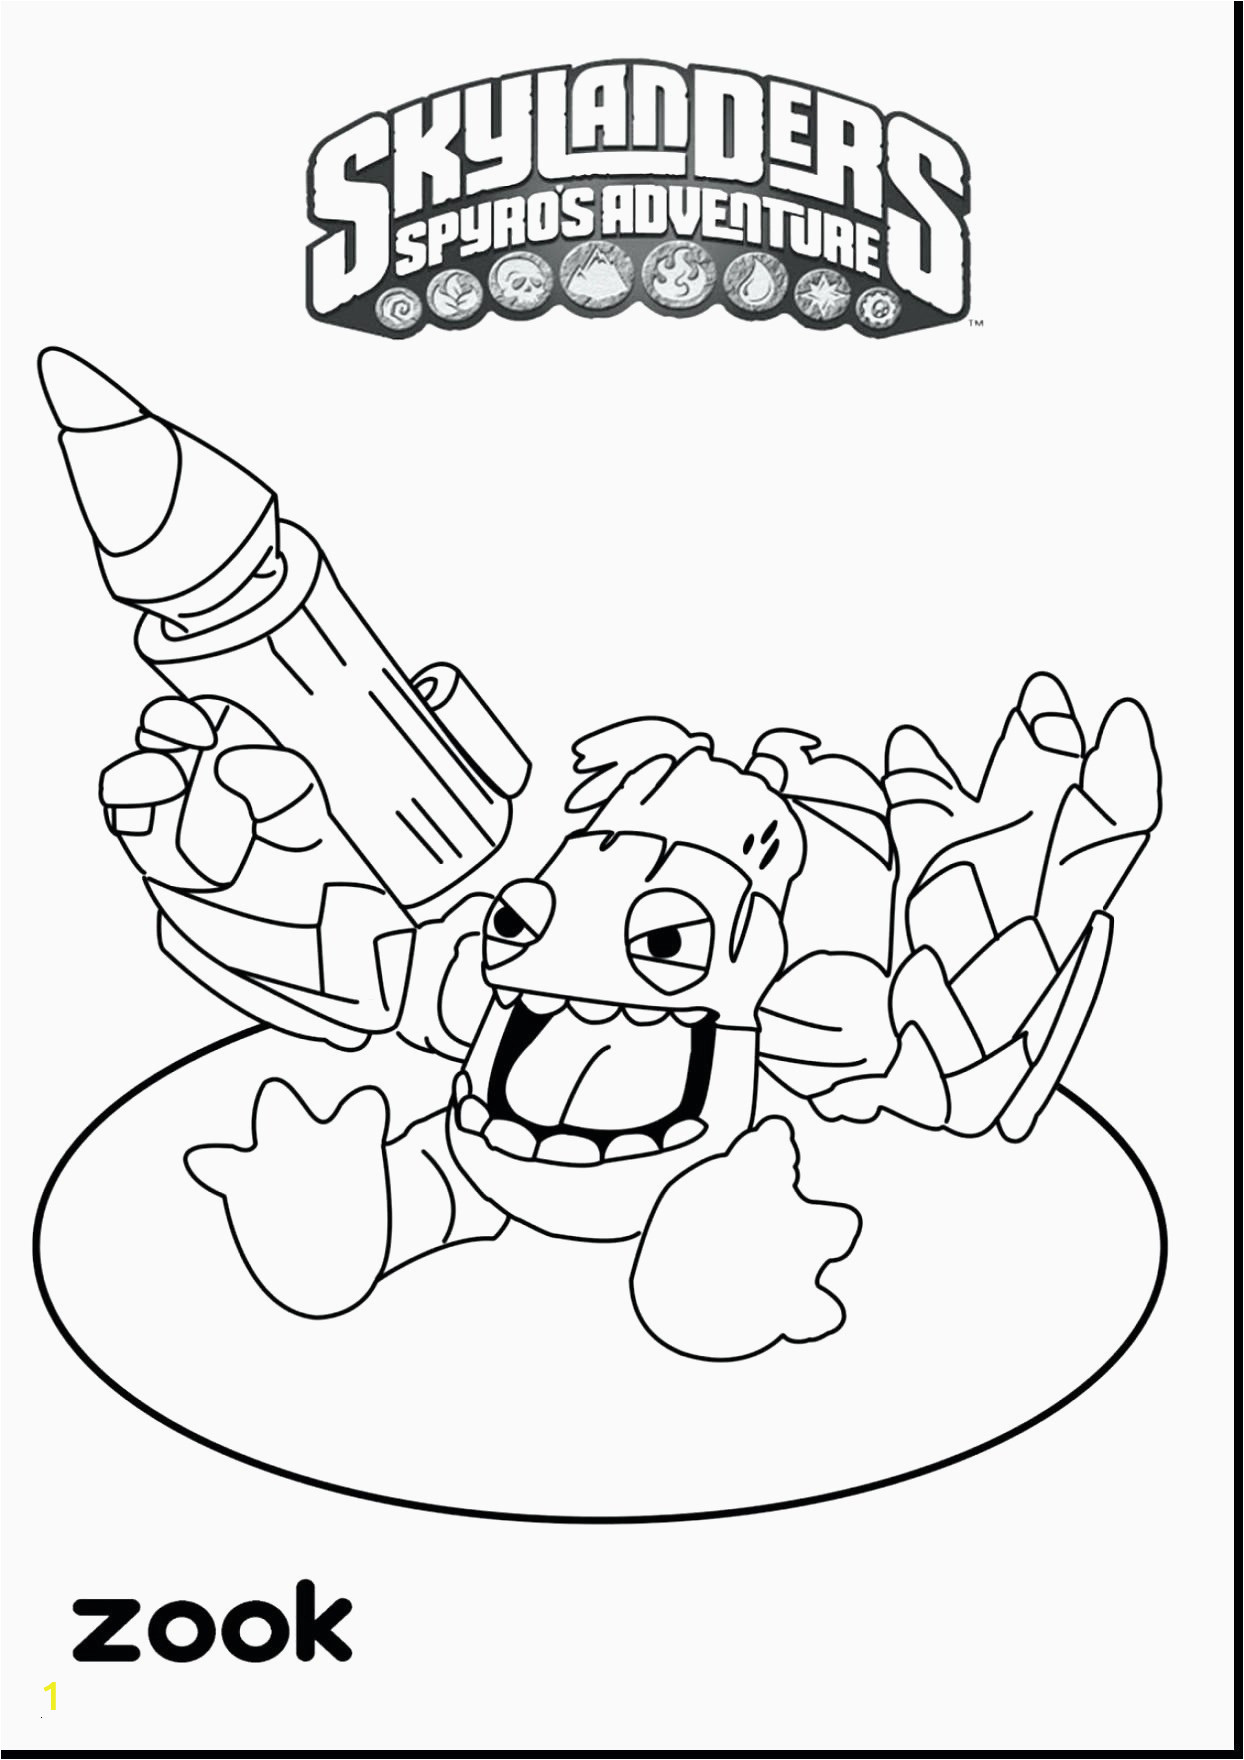 Magic Tree House Coloring Pages Free Magic Tree House Coloring Pages to Print